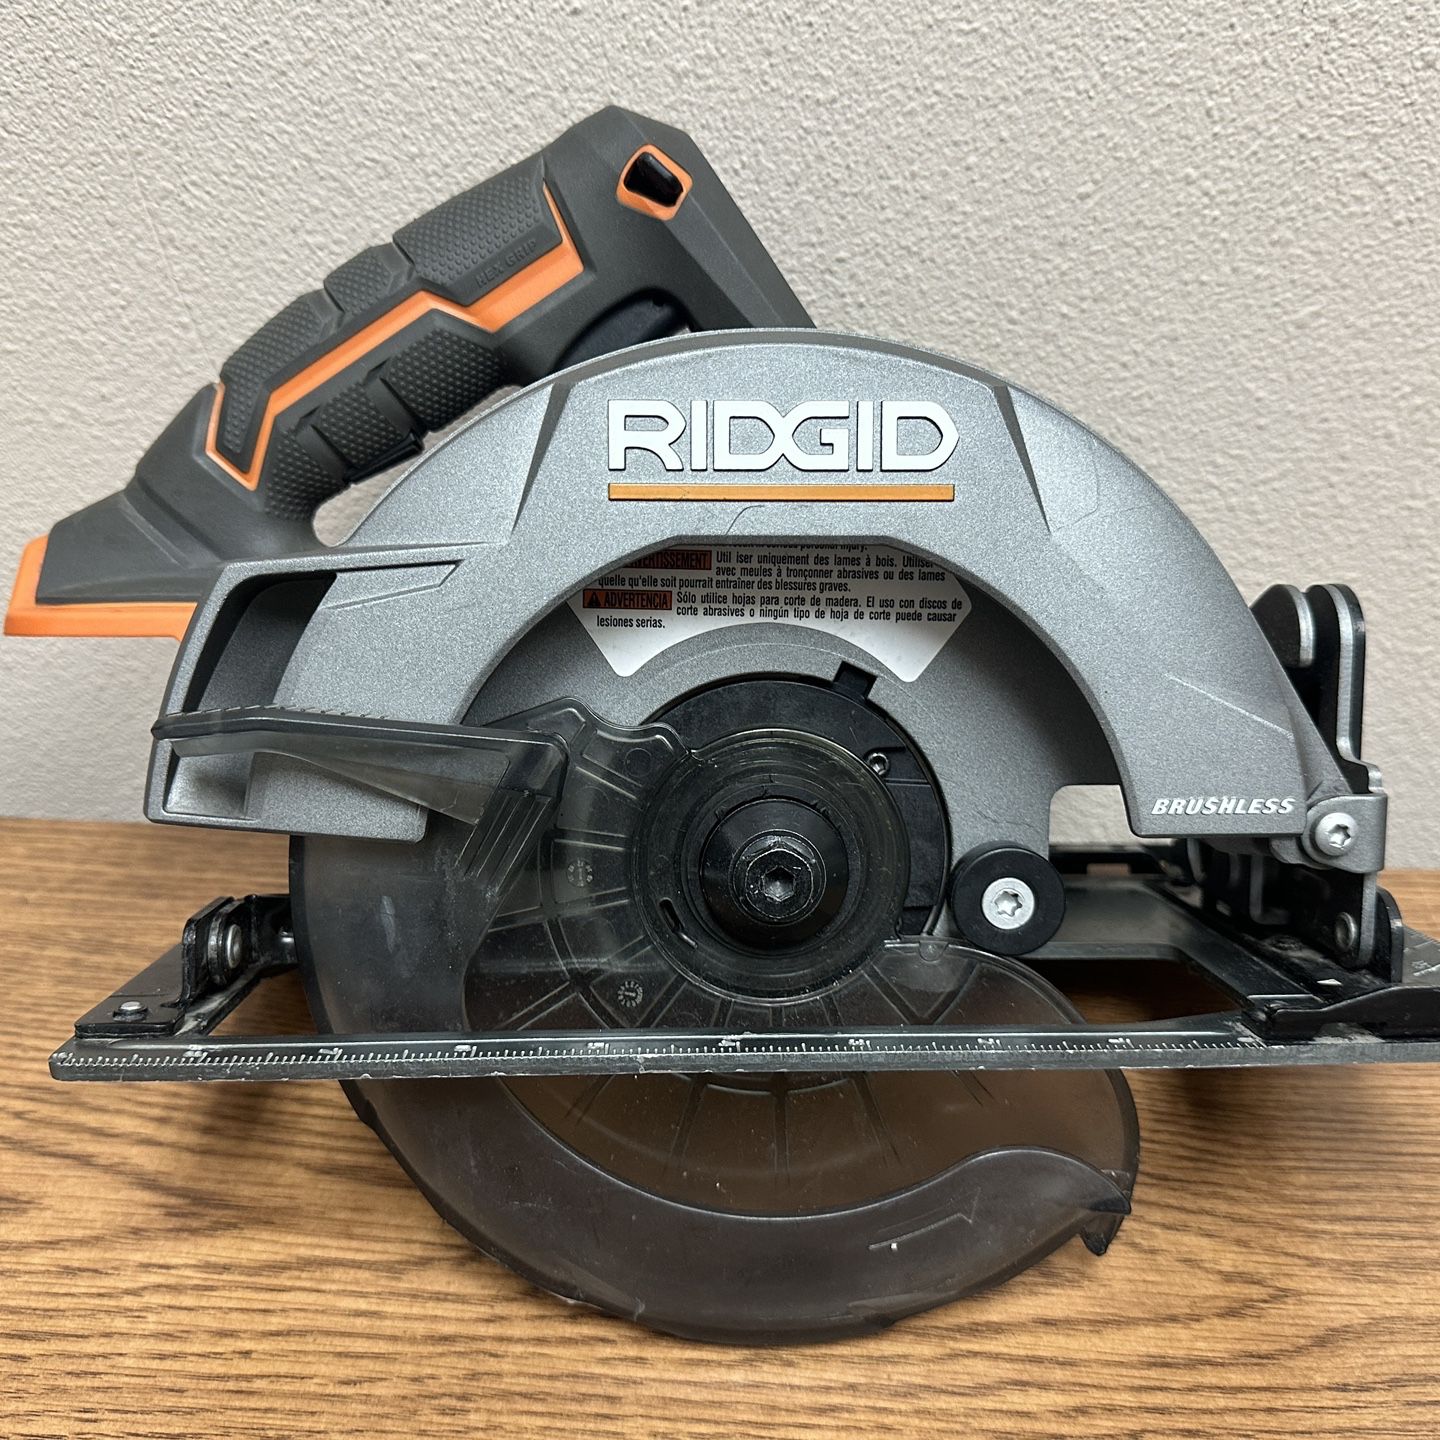 Ridgid R8653 Gen5X Brushless 18V Lithium Ion Cordless 1/4 Circular Saw  (Tool Only) for Sale in Lincoln Acres, CA OfferUp